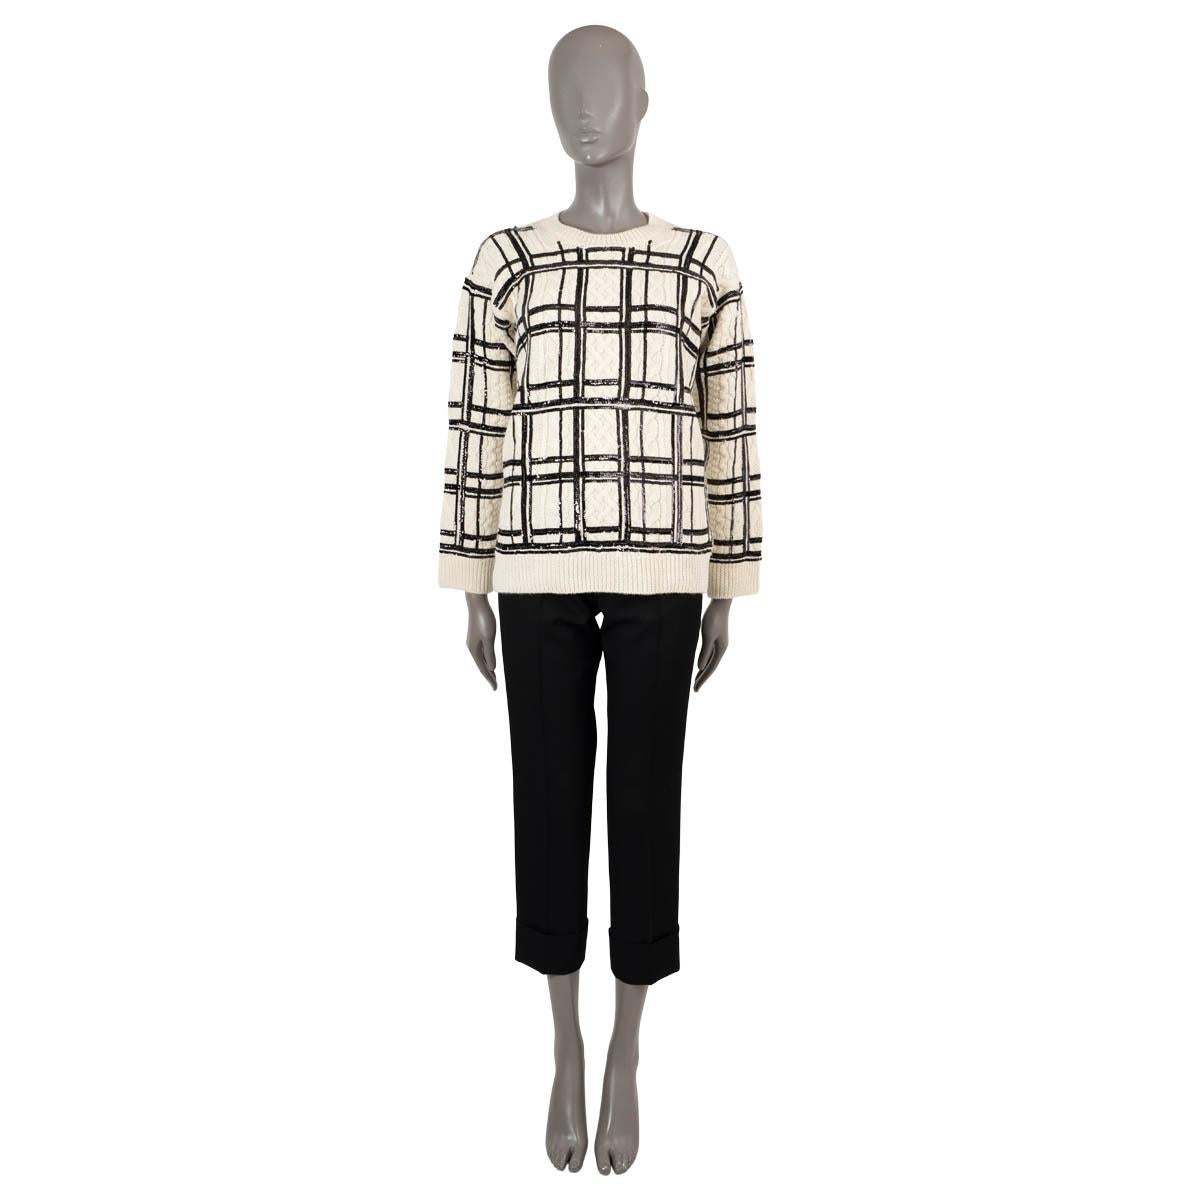 100% authentic Valentino cable knit sweater in cream wool (100%). Features plaid patterned sequins in black, a crewneck and rib knit cuffs and hem. Unlined. Has been carried and is in virtually new condition.

Measurements
Model	UB3KCB545S6
Tag